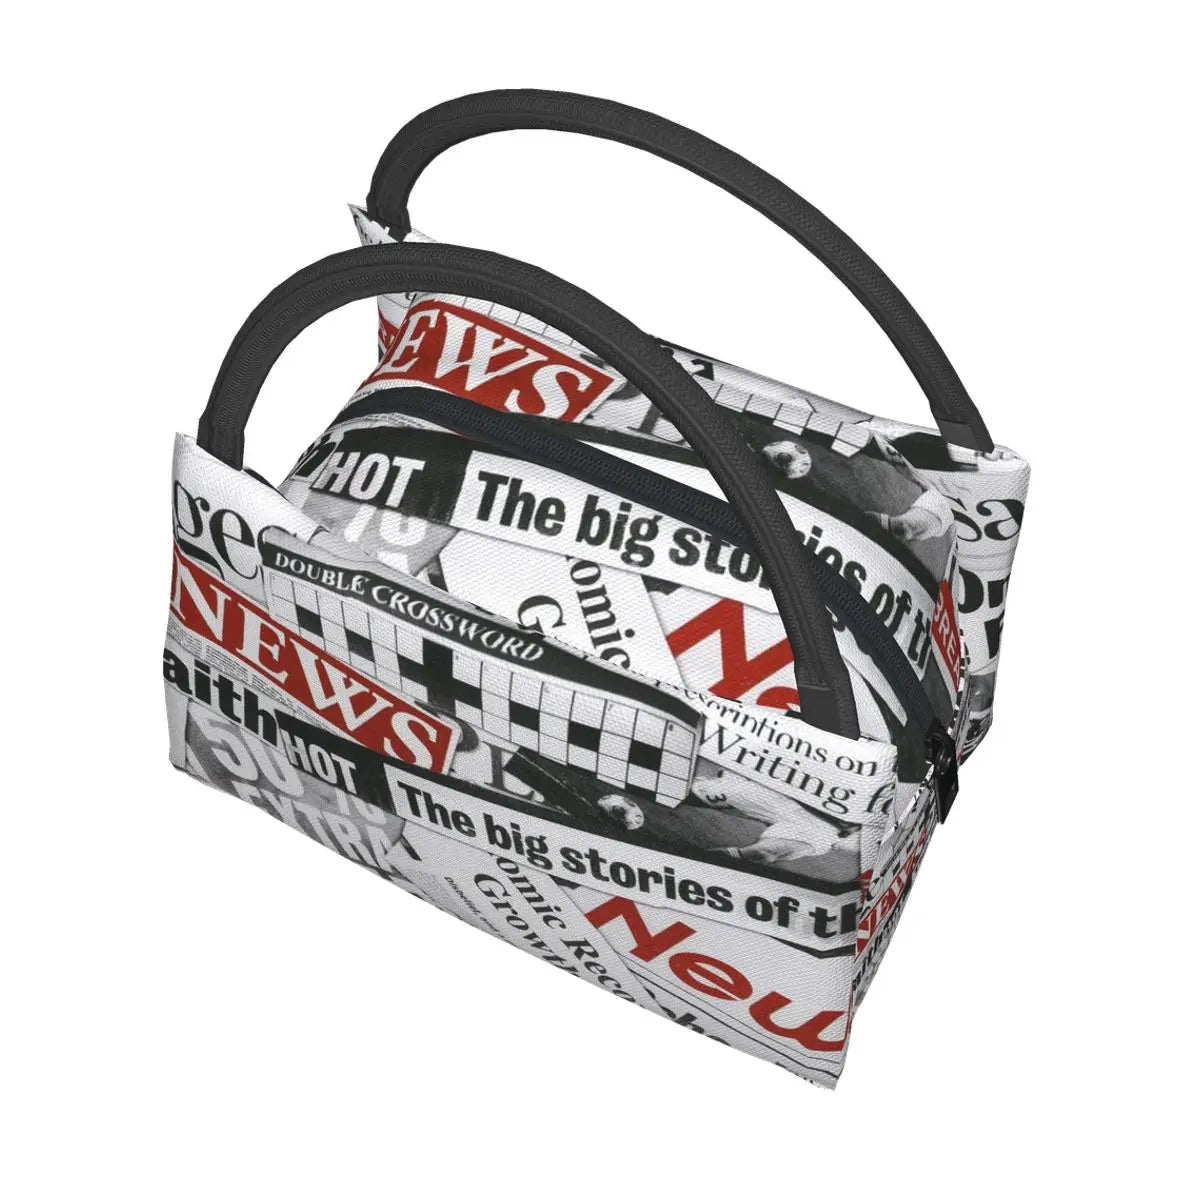 Portable Lunch Bag Newspaper Pattern Print Thermal Insulated Lunch Box Tote Cooler Handbag Bento Dinner Container School Storage